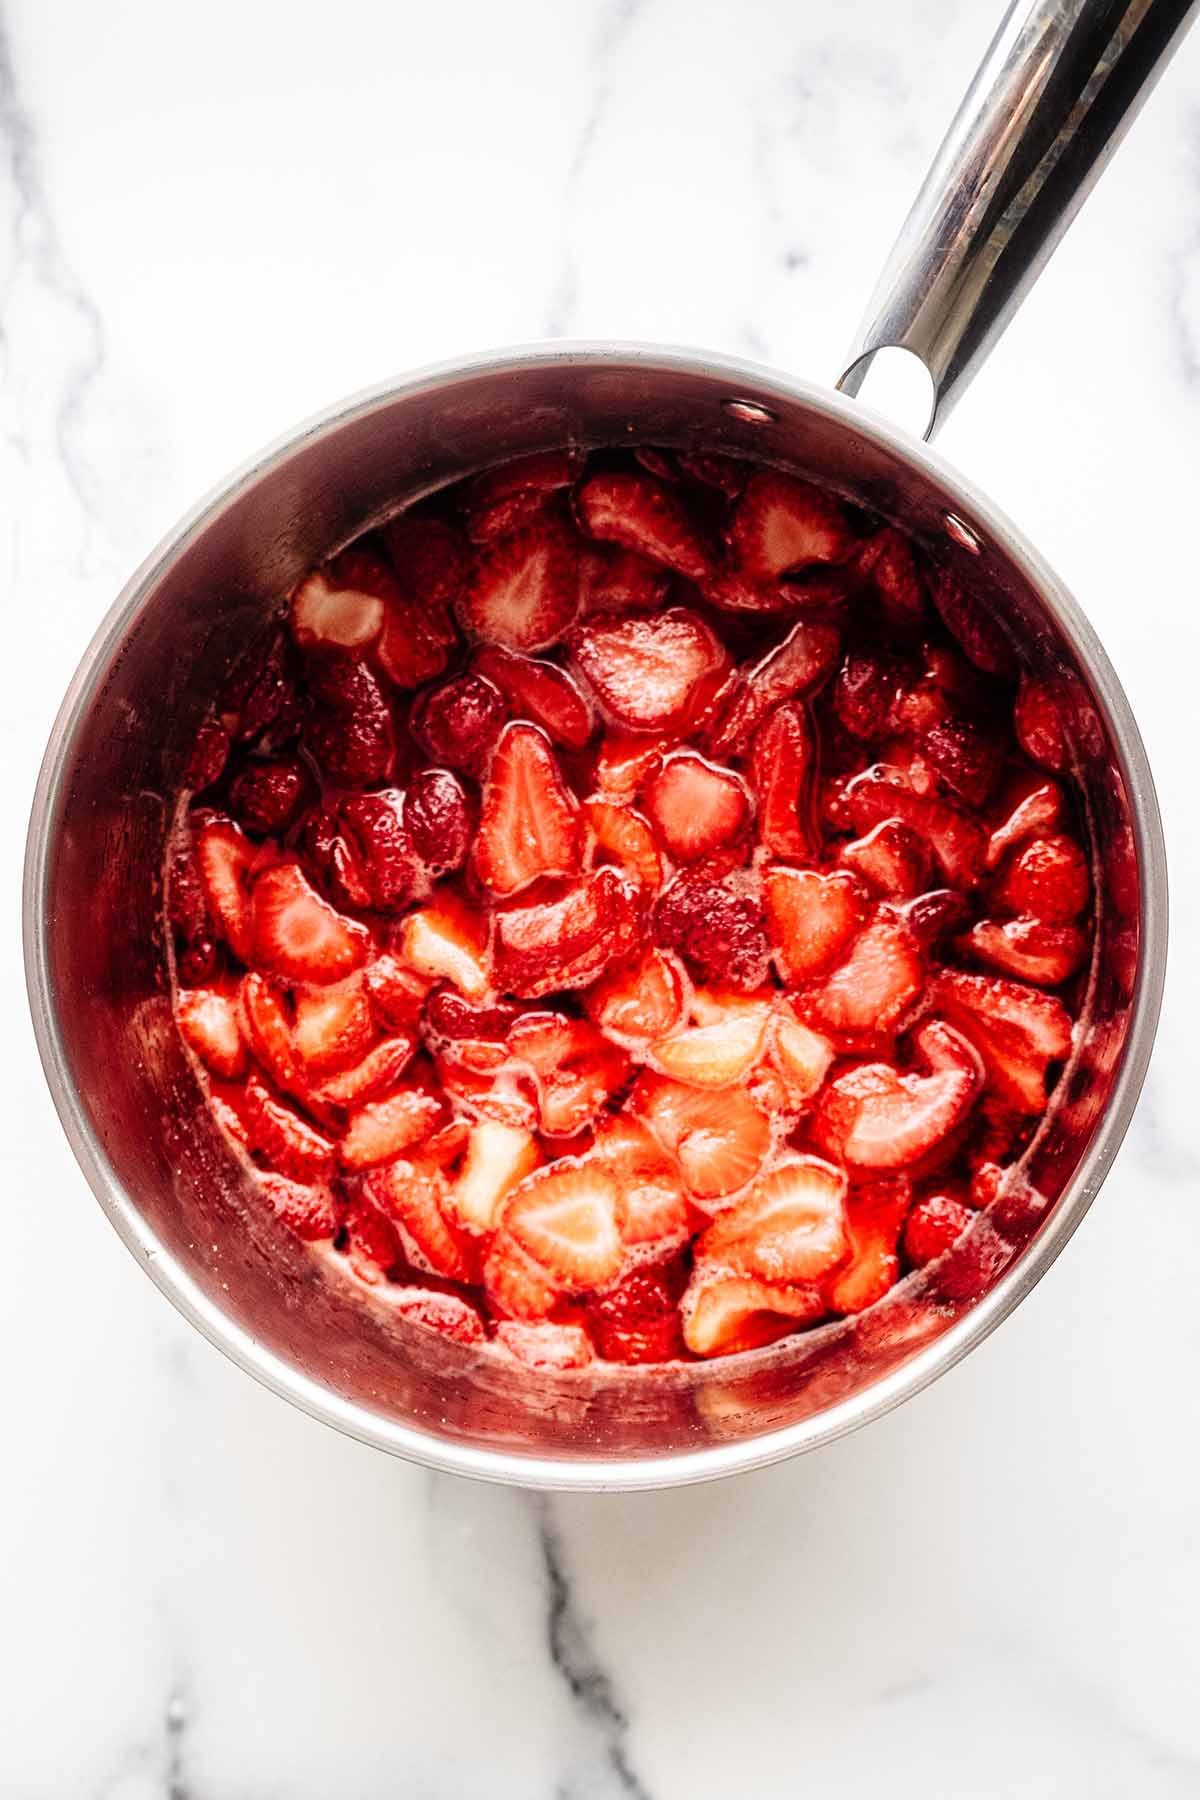 Overhead view of cooked strawberry compote in a stainless steel saucepan